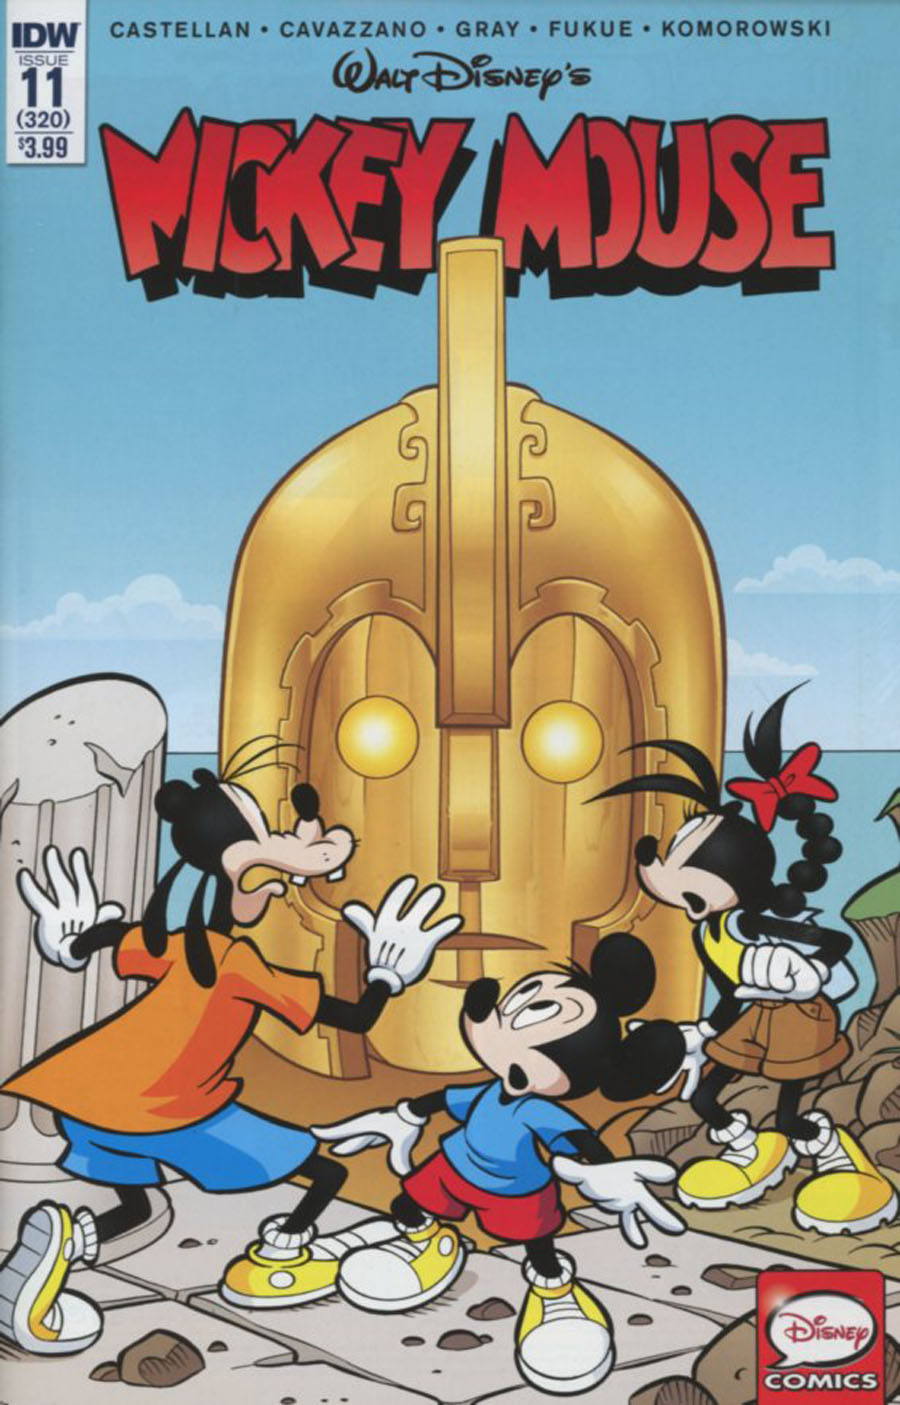 Mickey Mouse Vol 2 #11 Cover A Regular Andrea Casty Castellan Cover